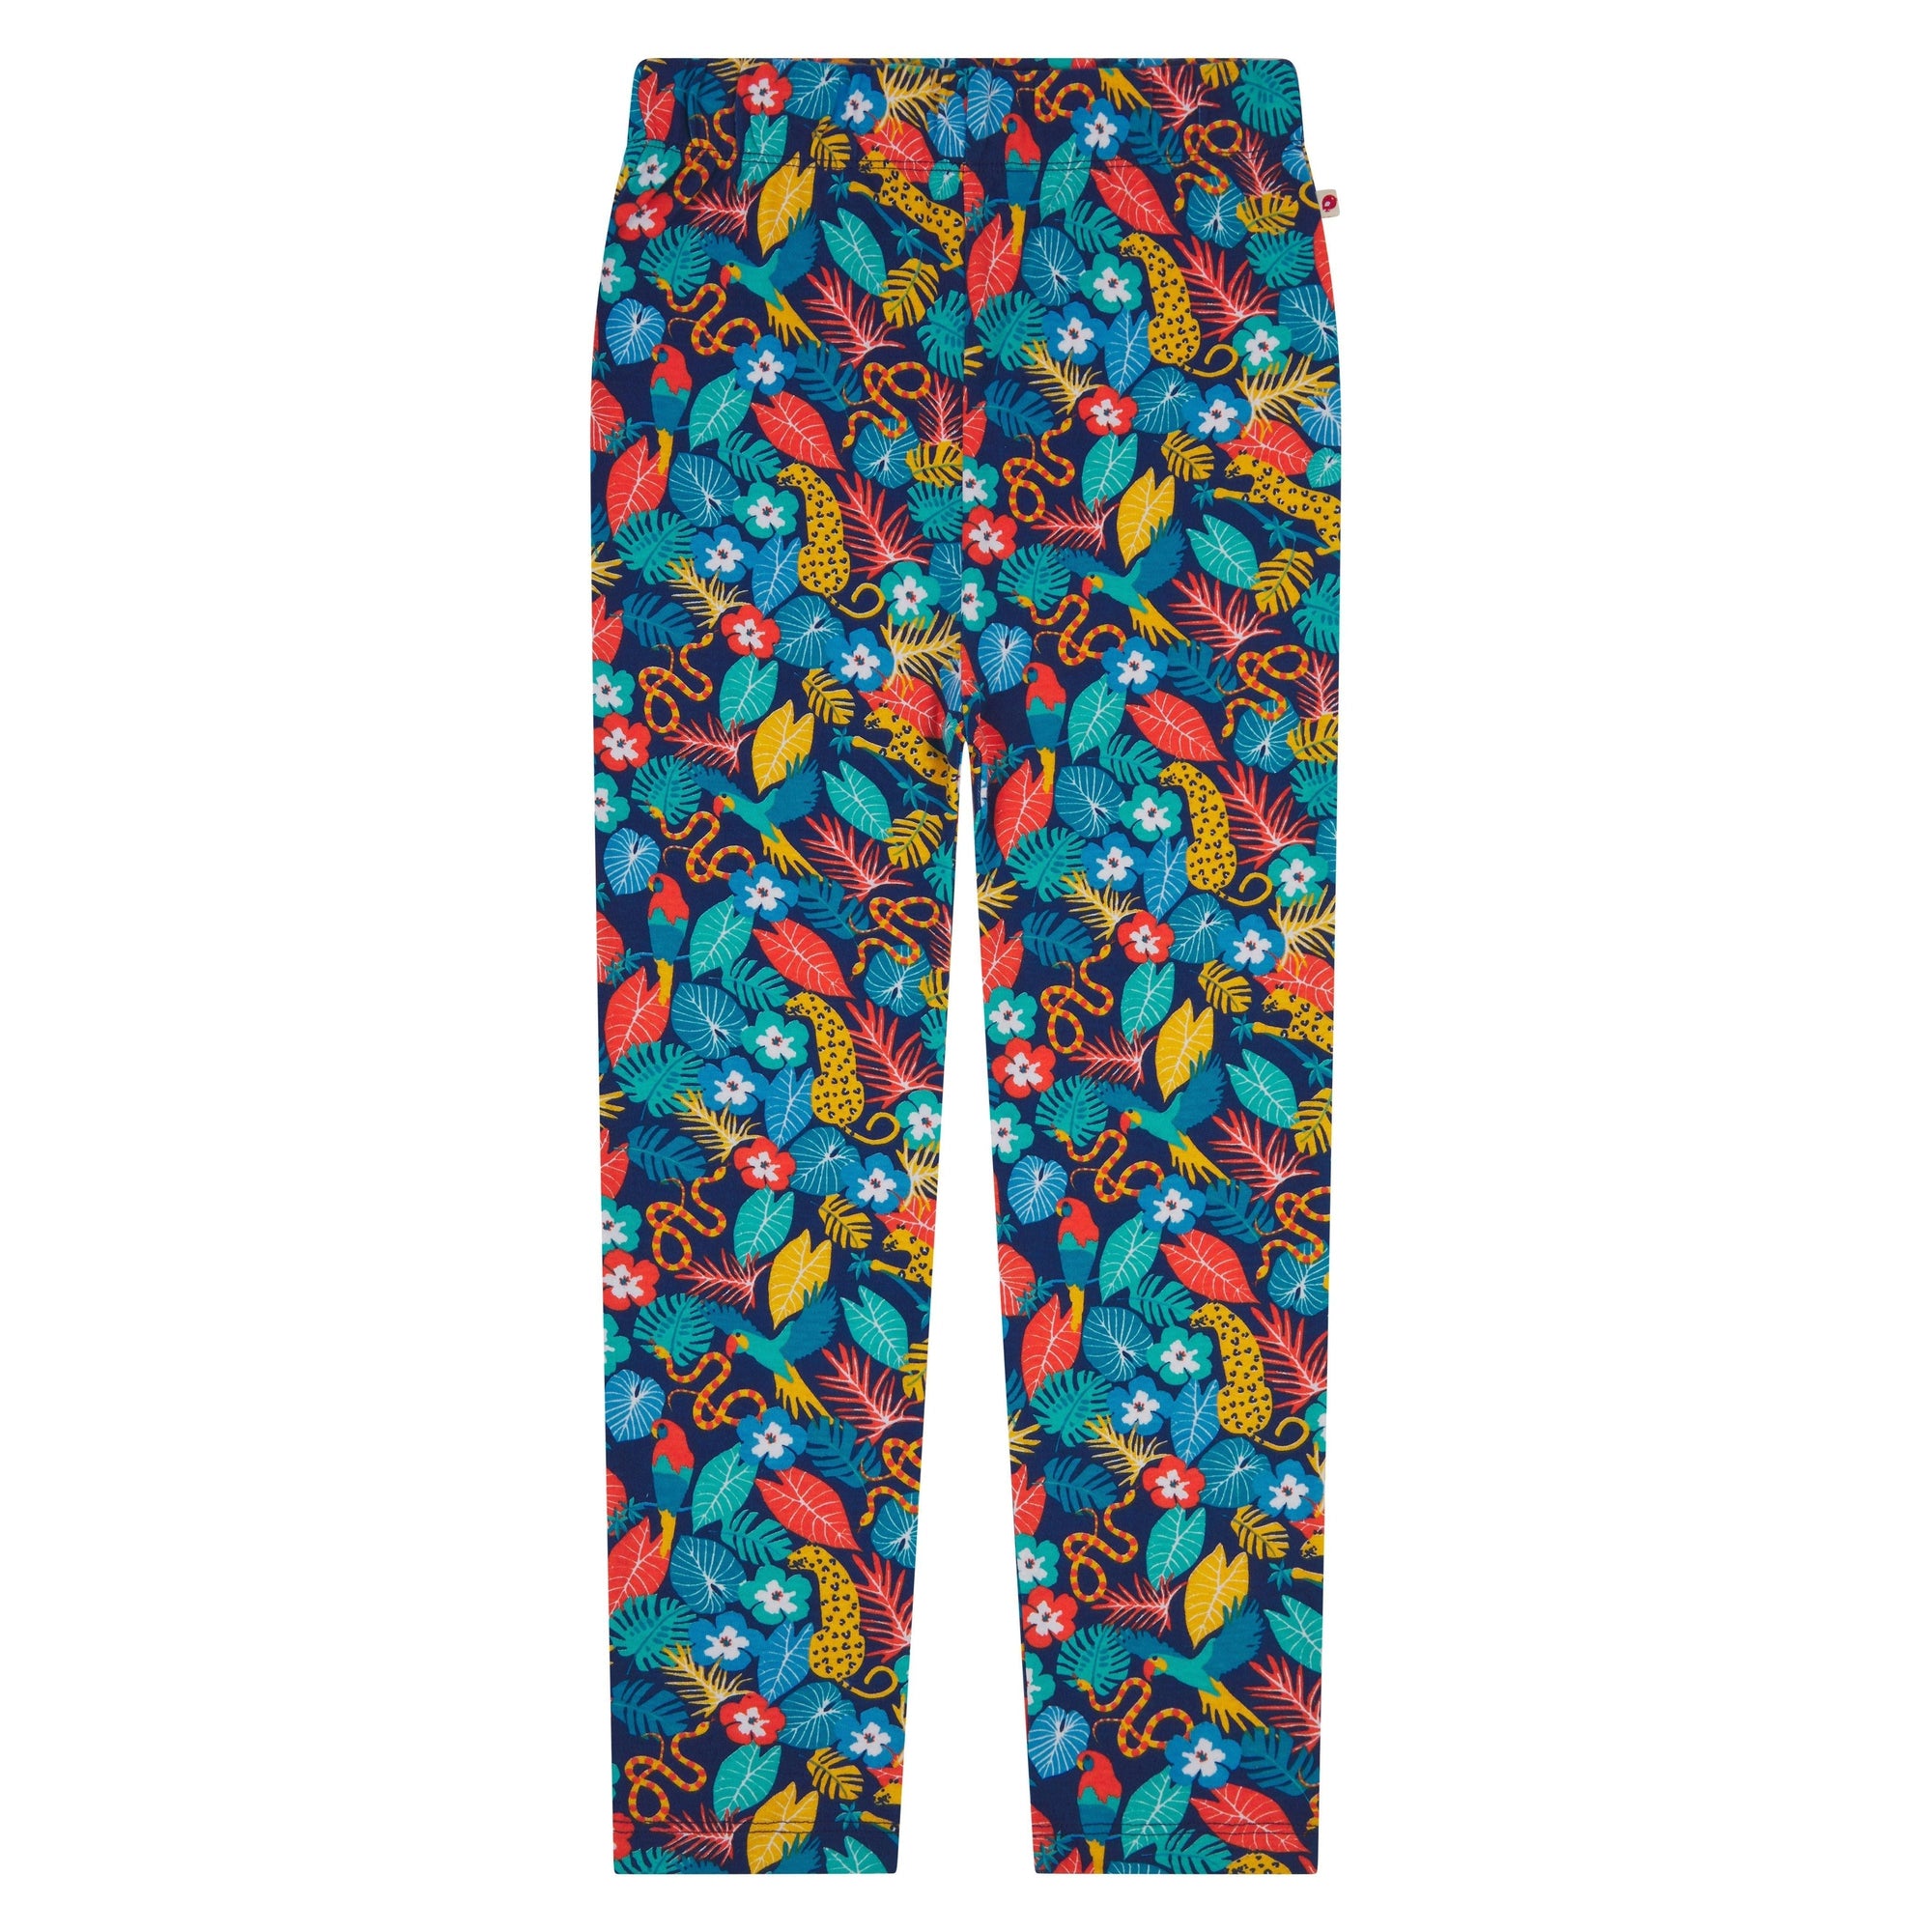 Tropic Leggings - 1 Left Size 2-3 years-Piccalilly-Modern Rascals